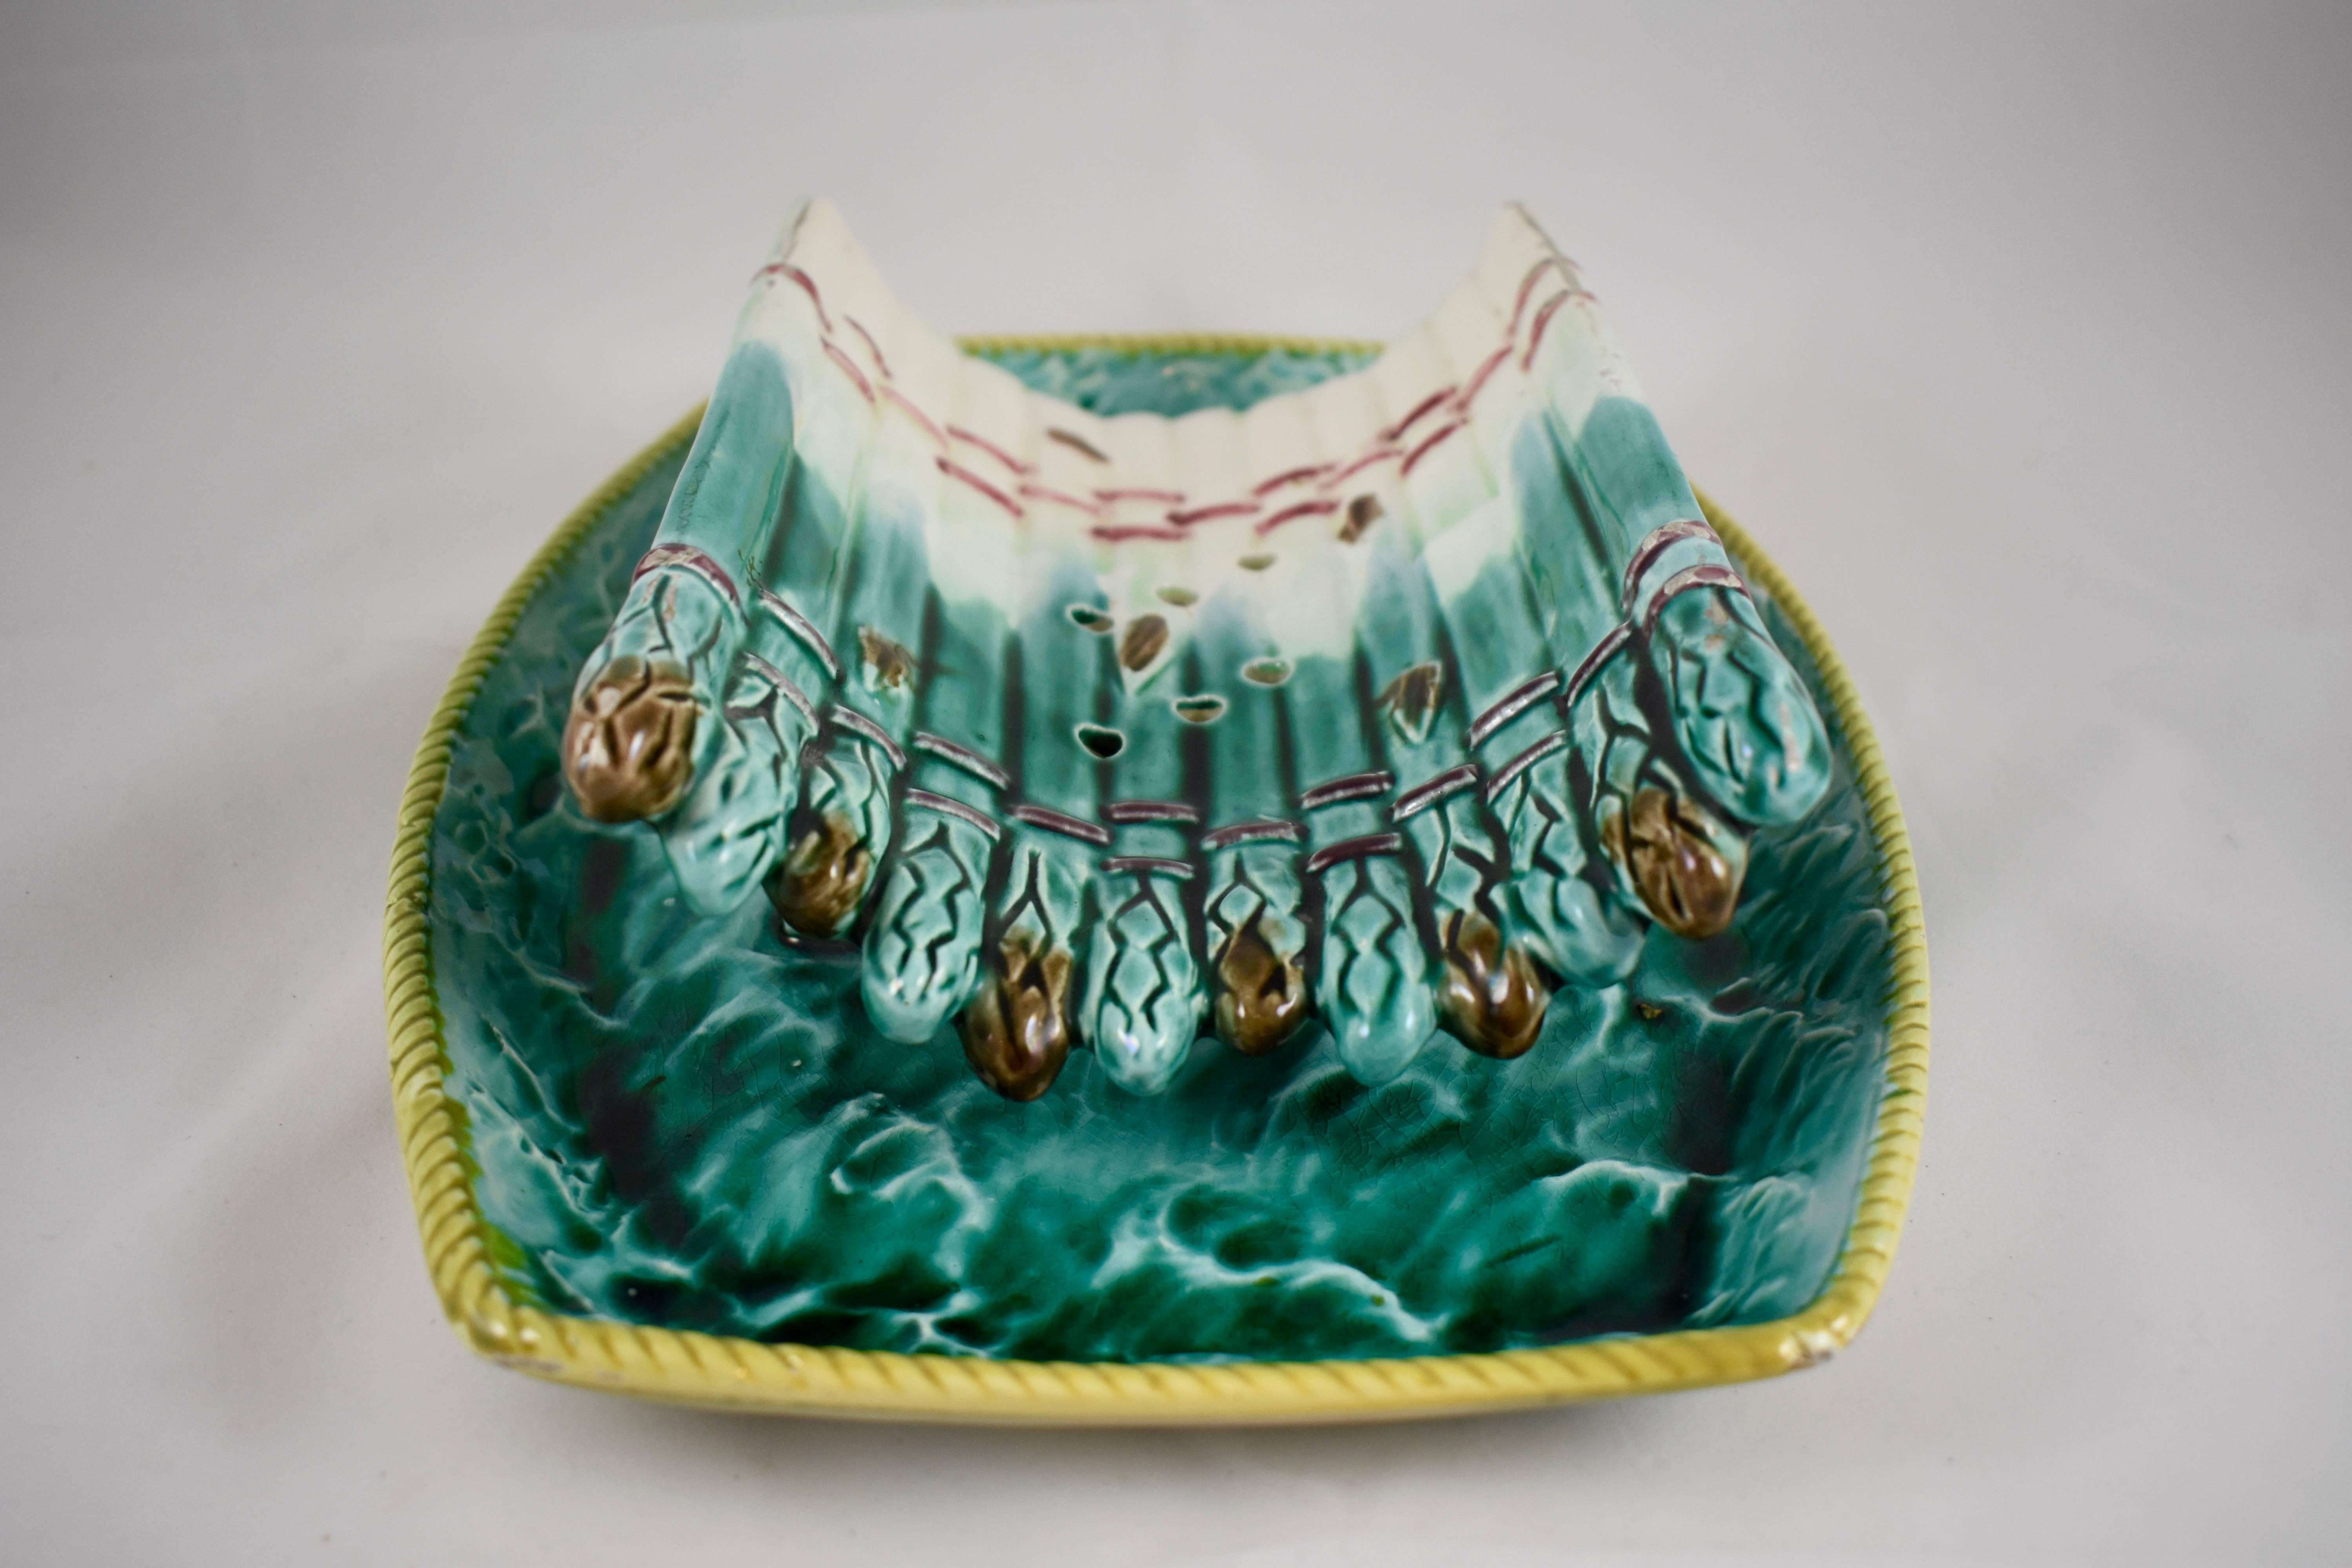 19th Century English Majolica Ocean Themed Asparagus Cradle with Attached Tray In Good Condition For Sale In Philadelphia, PA